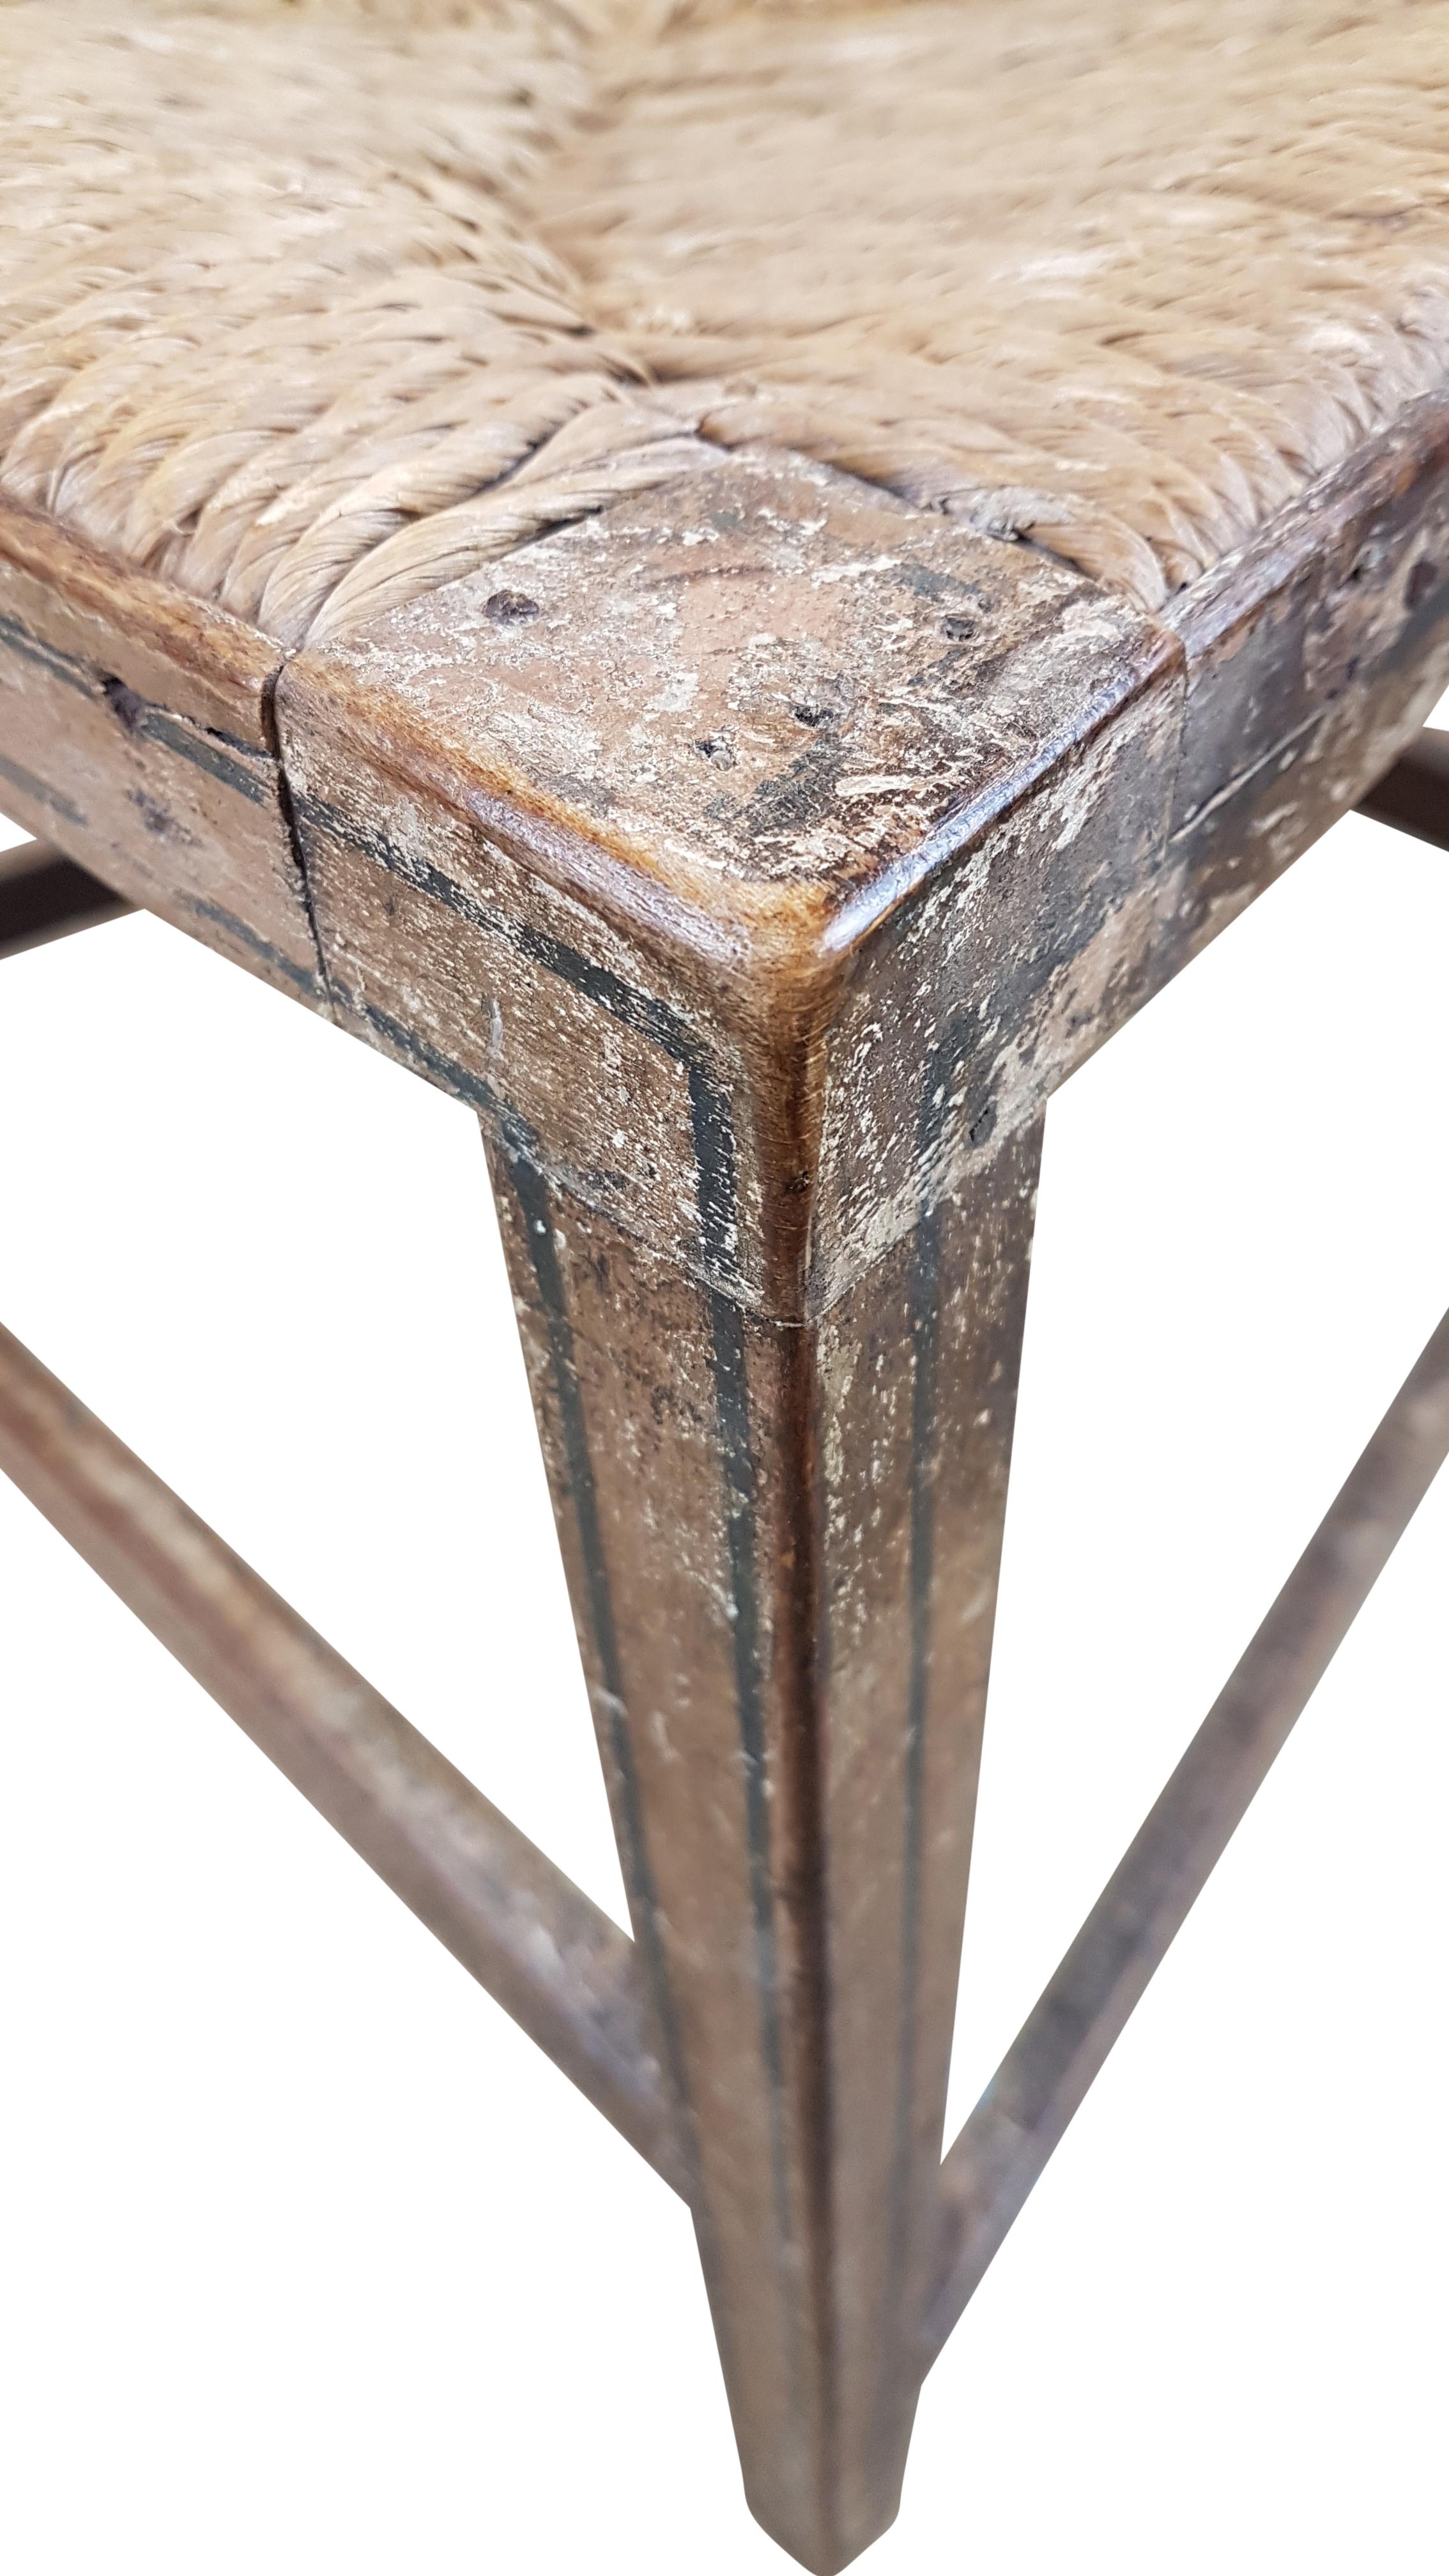 Early 19th Century Georgian Chair in Original Painted Decoration In Distressed Condition For Sale In Bodicote, Oxfordshire